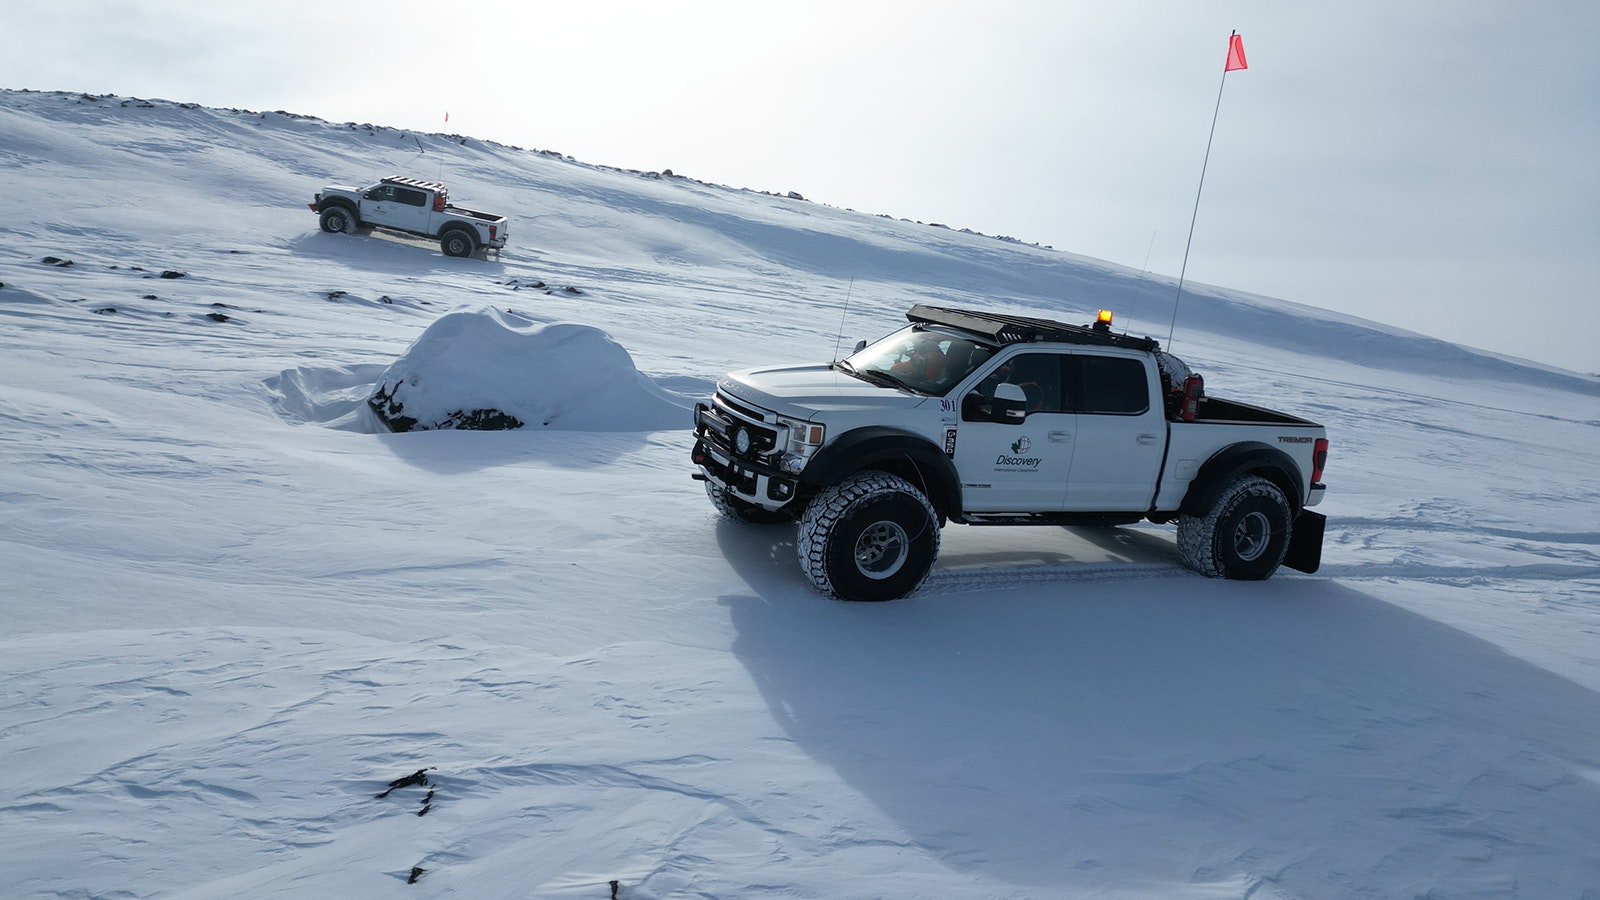 The Arctic Trucks North America shop in Cheyenne Customizes pickups to take on just about any winter conditions.